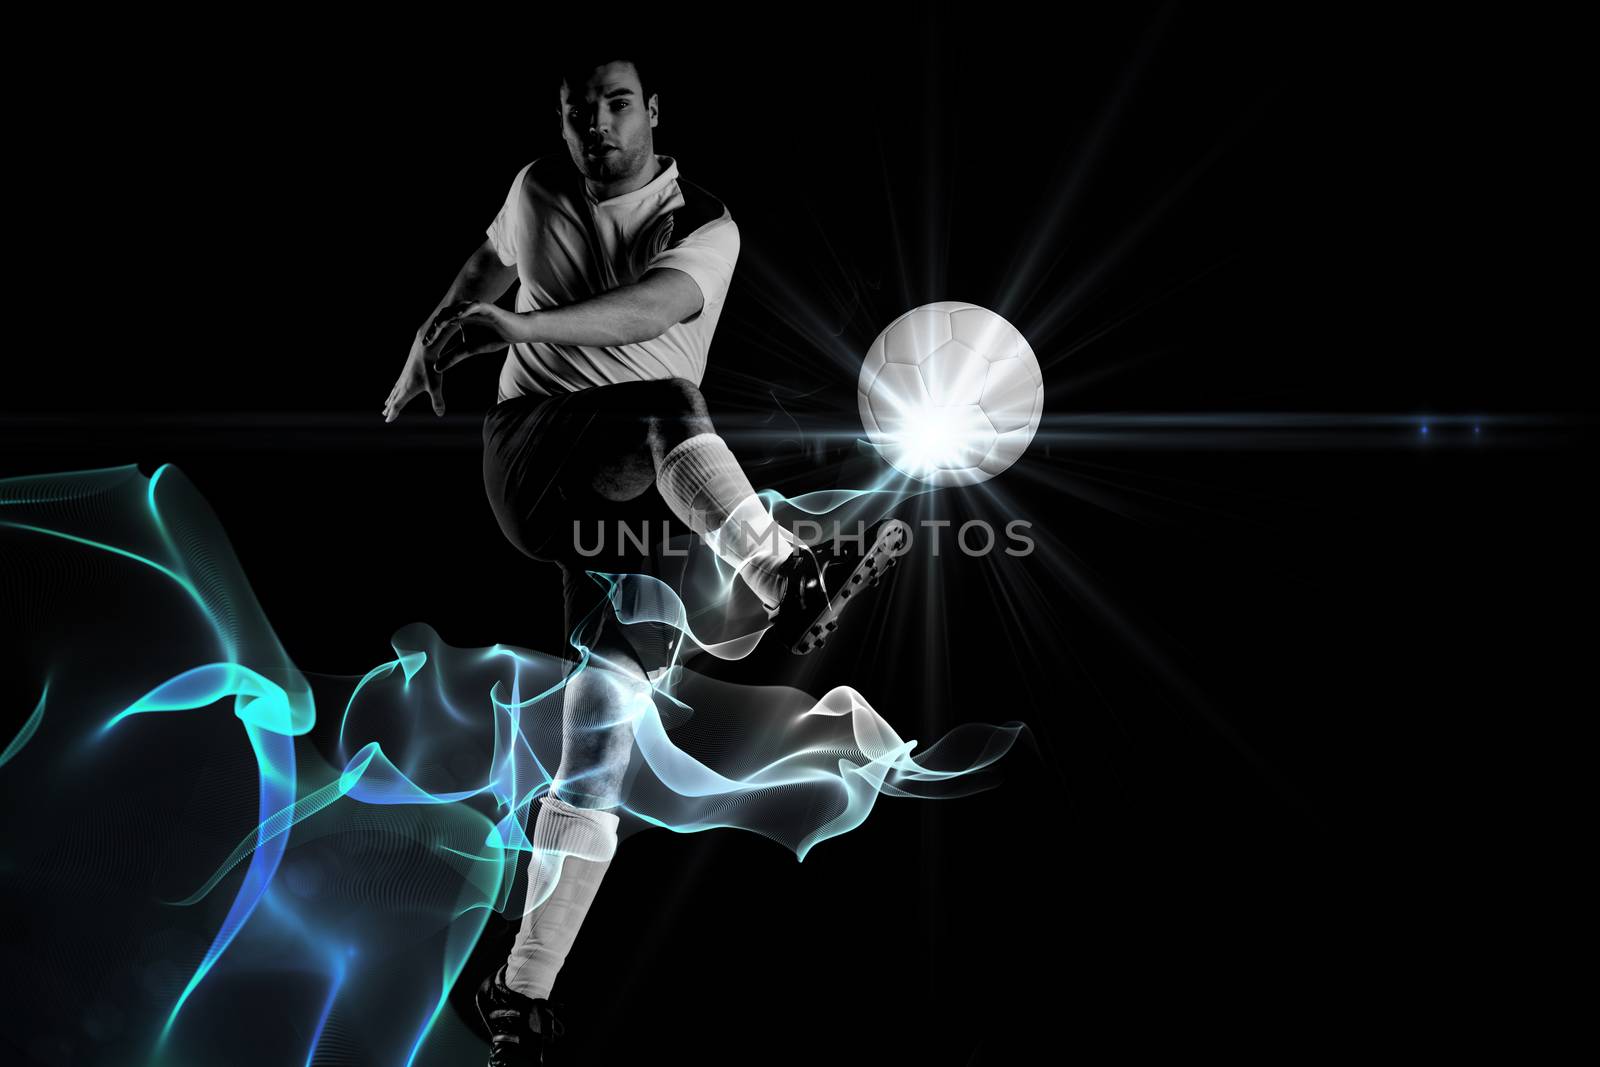 Football player in white kicking against abstract glowing black background